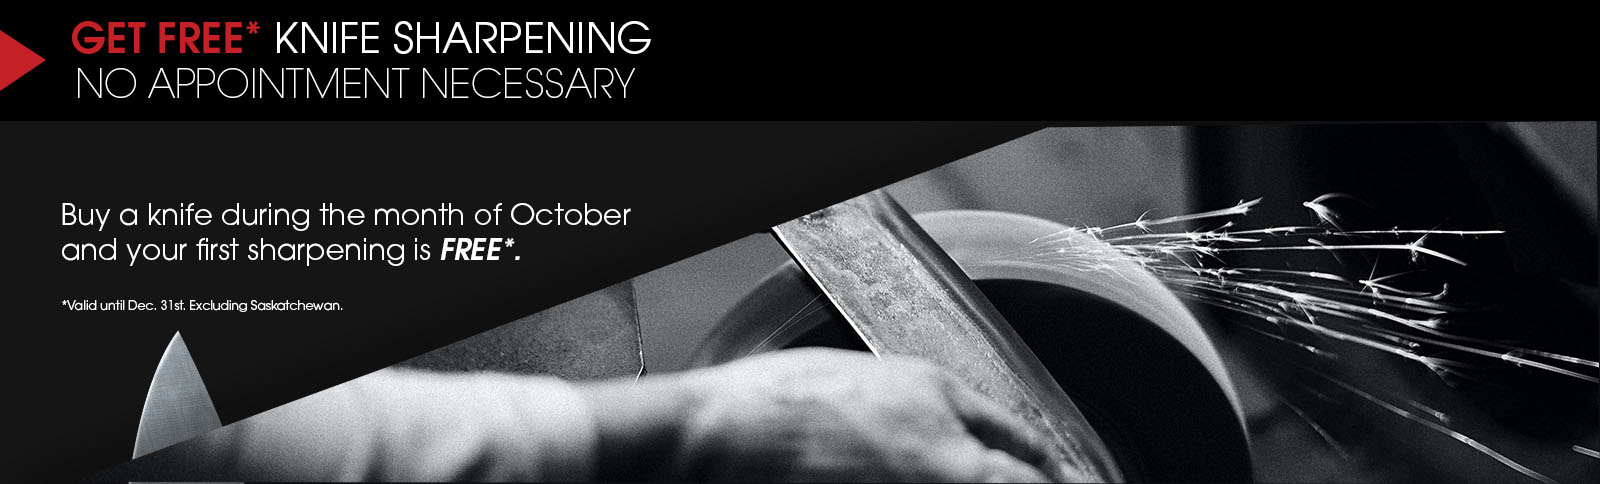 Buy a knife and get the first sharpening free!